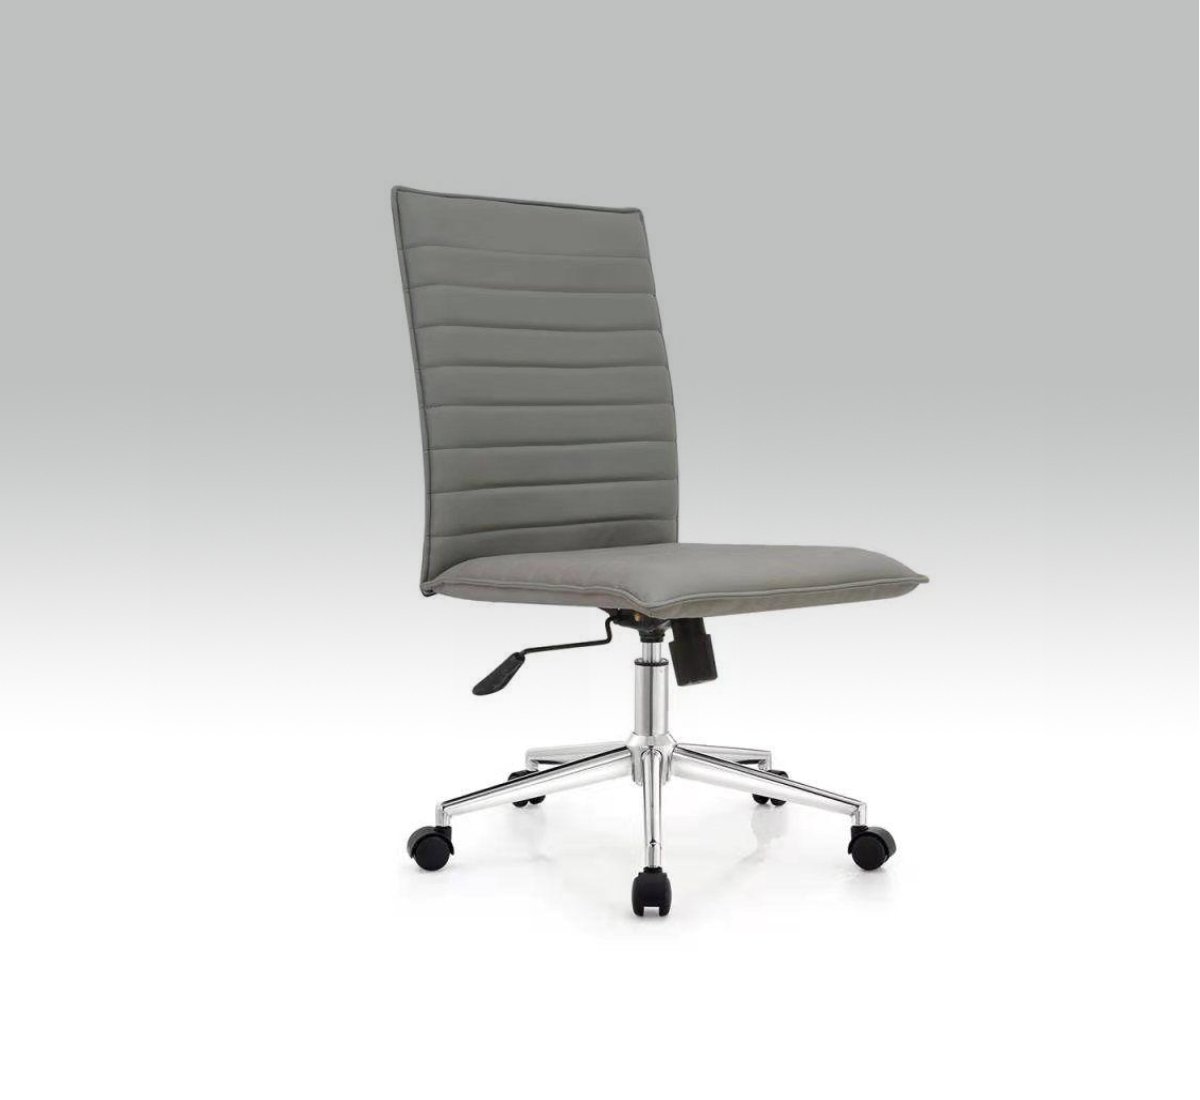 Ergonomic Hotel Desk Chairs Without Arms - Gray Color